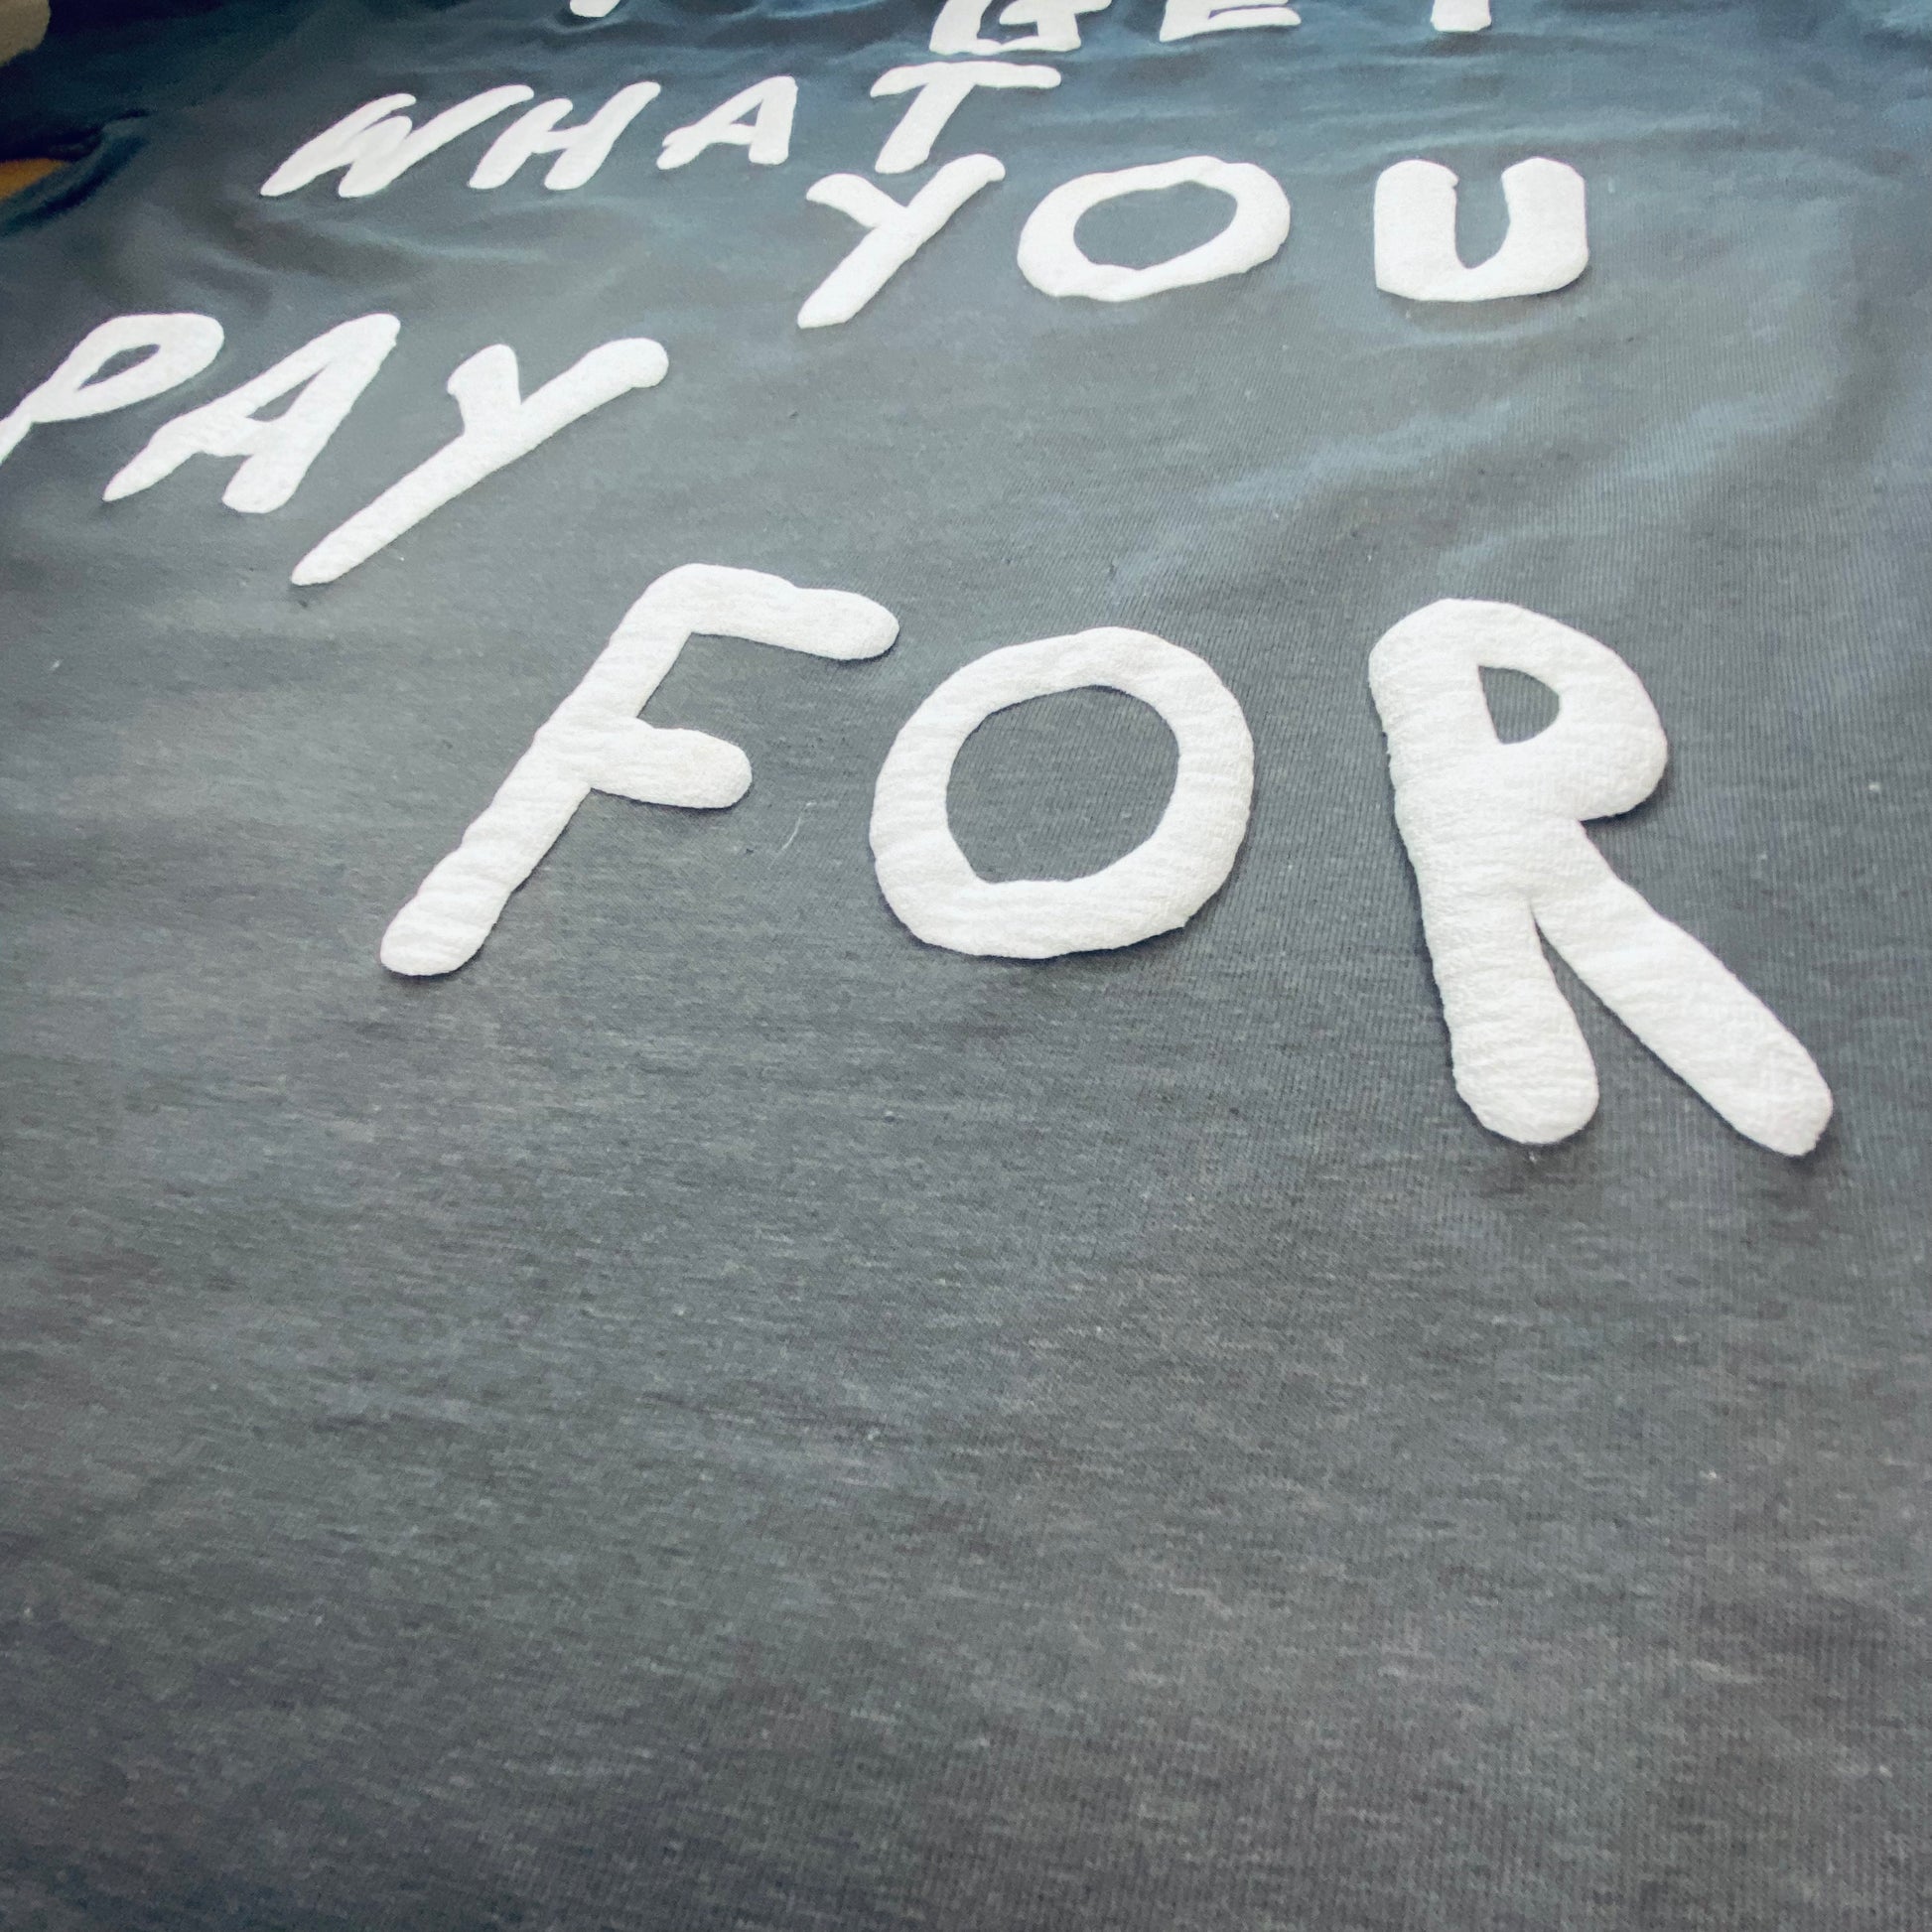 You Get What You Pay For [Puff Print] T-Shirt - TYLER VANG